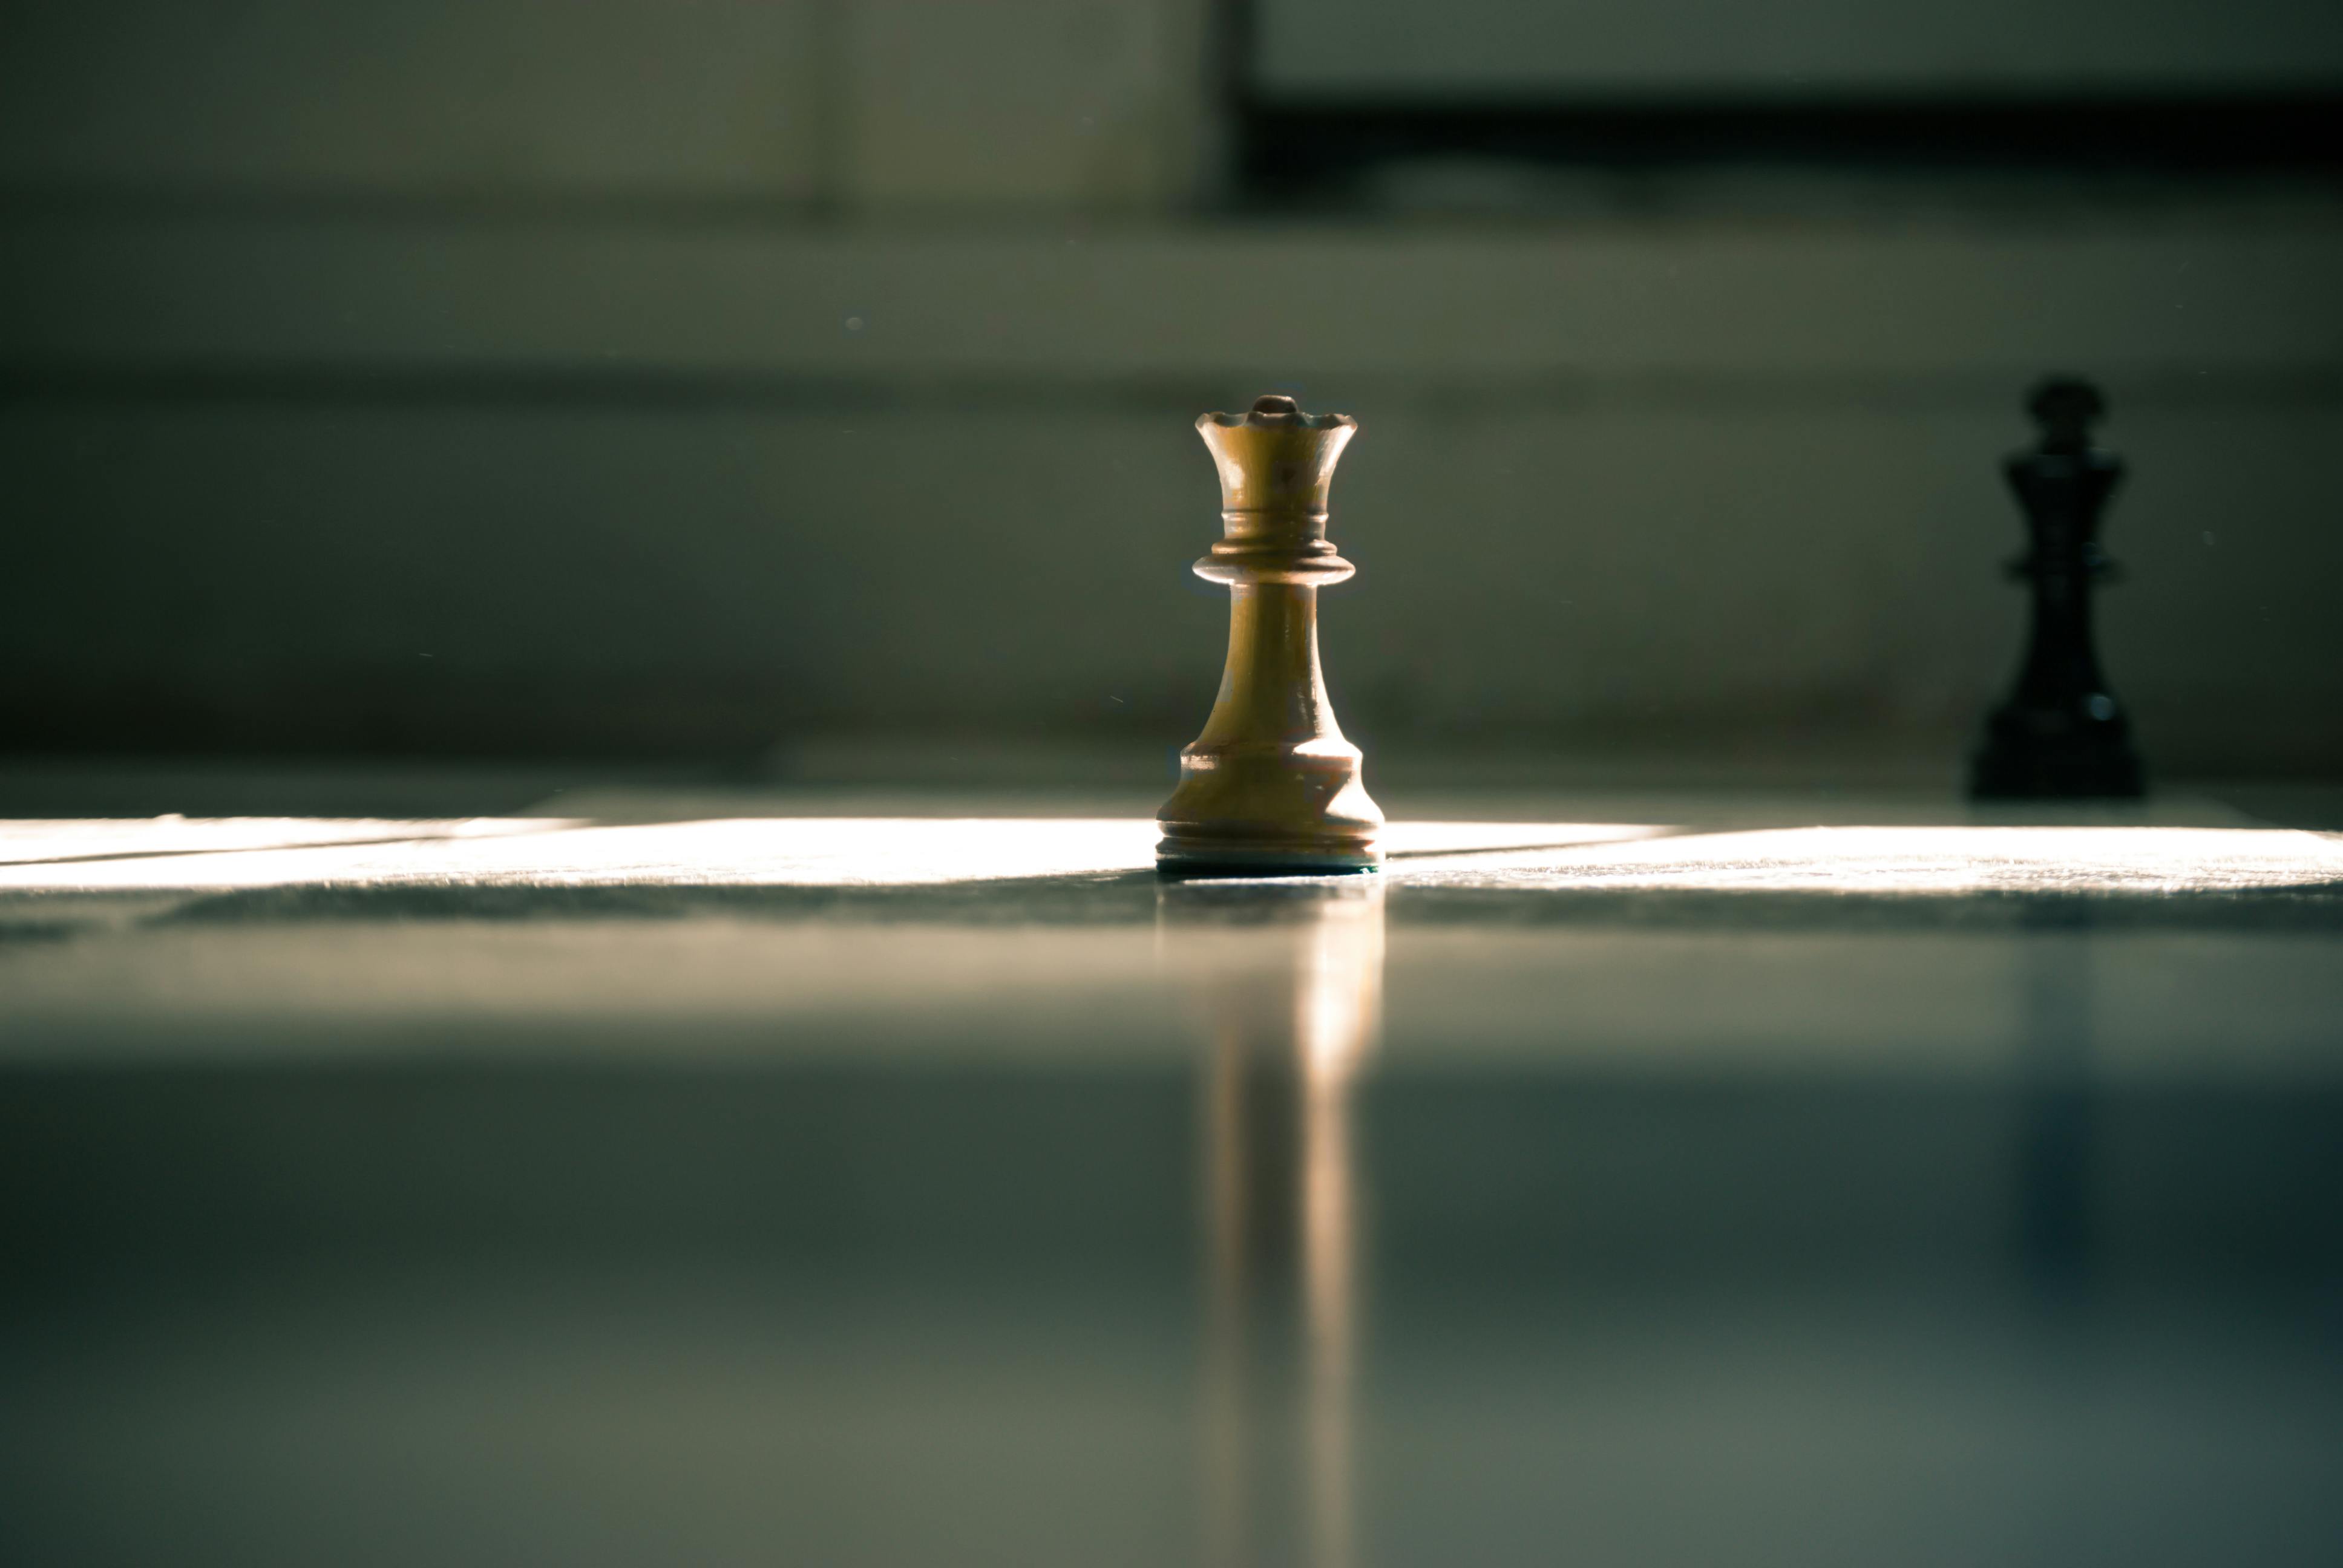 Chess [2] wallpaper - Photography wallpapers - #20720